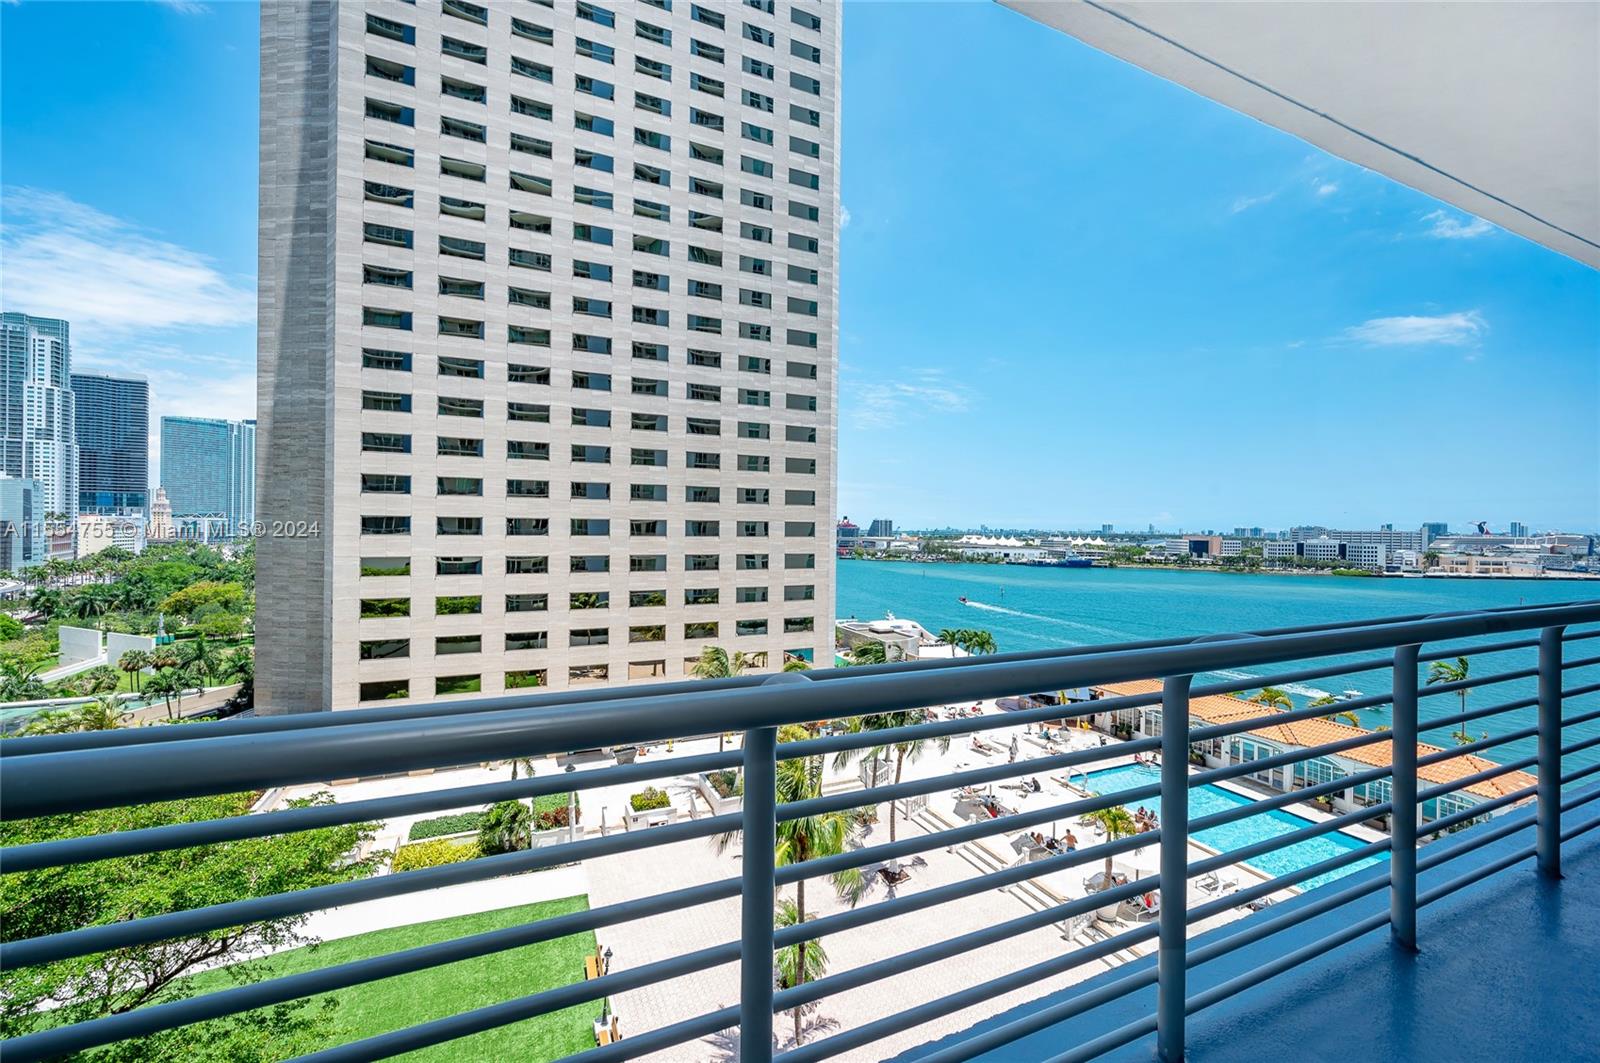 Don't miss this incredible opportunity to enjoy waterfront living in one of Miami's most desirable Bayfront buildings. This property offers stunning city and bay views, along with a +846sqft spacious layout that is hard to find.

The sale includes one (1) parking space + one (1) private storage cage. The owner has already paid all the assessments in full. Additionally, a new and modern elevator system has been installed in the building for added convenience.

Amenities include 2pools, 2party rooms, 2gyms, jacuzzi,  sauna, sundeck area, and a convenience store downstairs, 24-hr security, valet, and concierge services.

The location is prime, with easy access to many fabulous places. Within walking distance, you'll find Whole Food, restaurants, Bayfront Park, Brickell City Center, etc